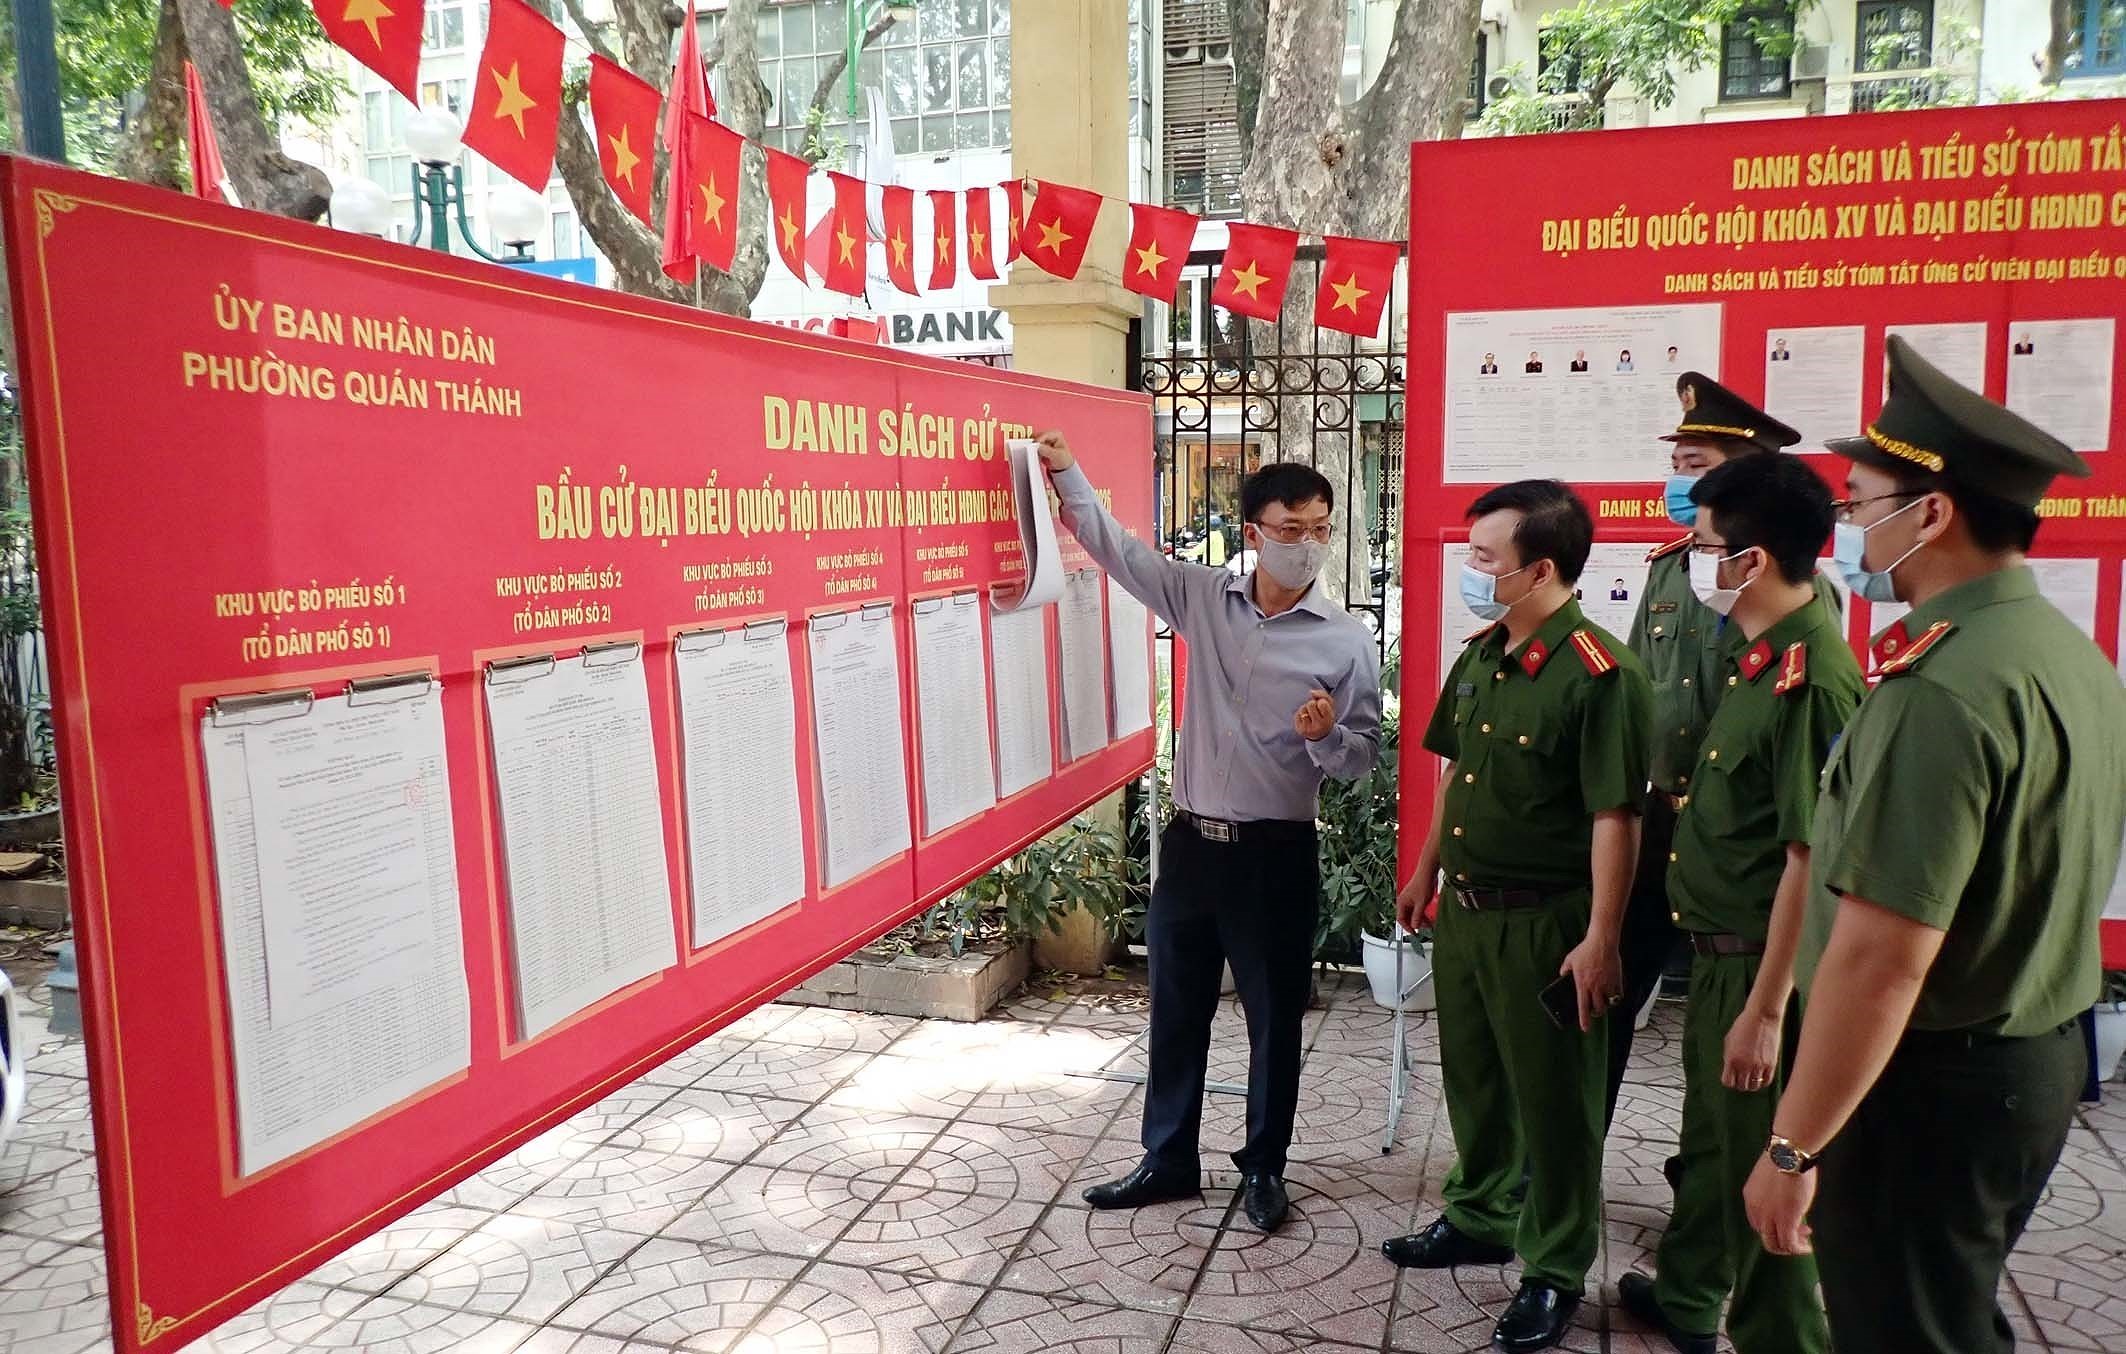 Hanoi’s police ensures security, order for election day hinh anh 1